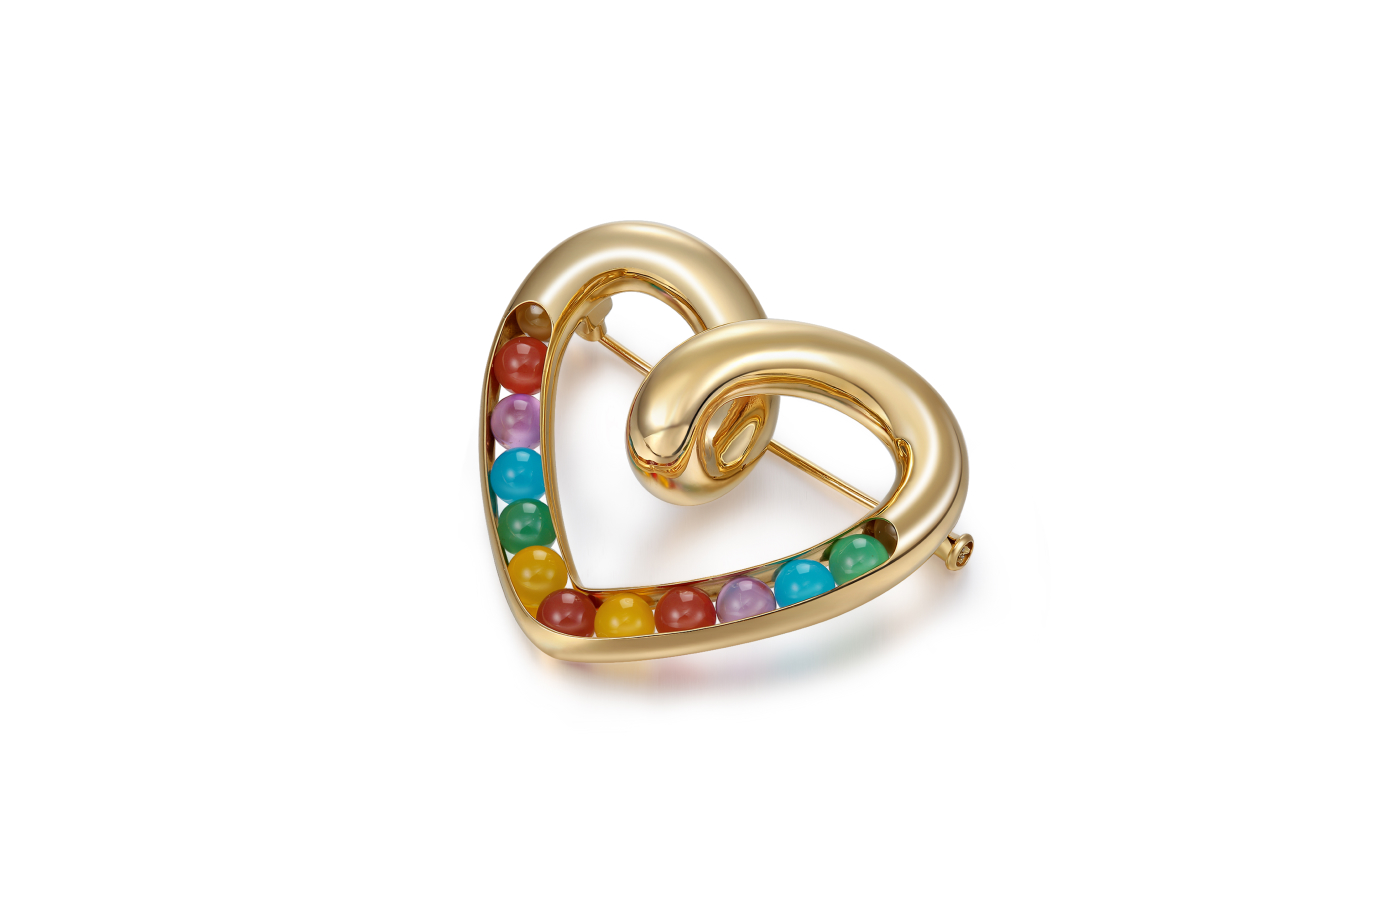 Zeemou Zeng Beating Heart brooch in 18k yellow gold with 27 rainbow coloured gemstone beads